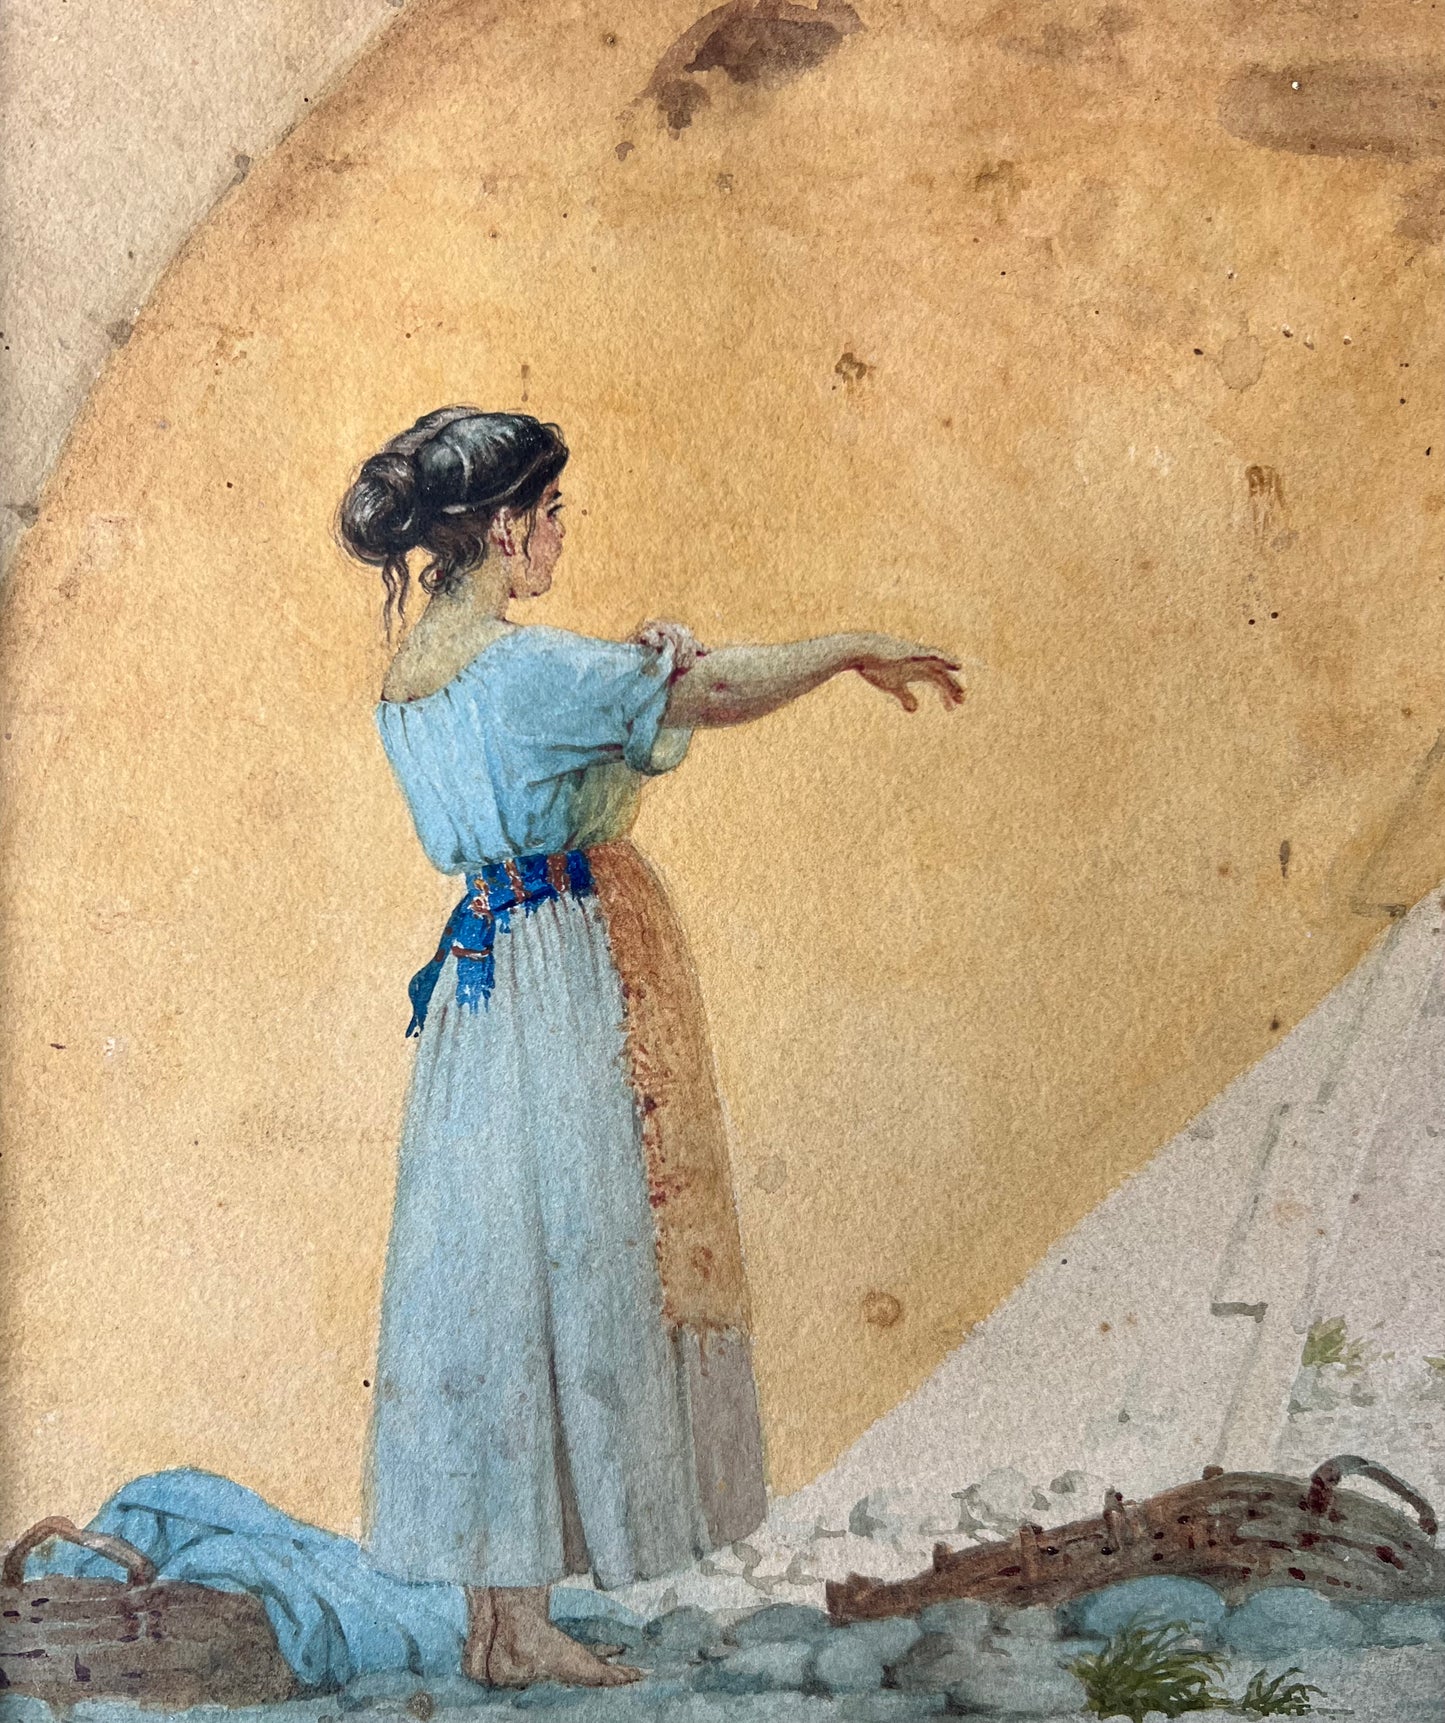 Unknown artist. A laundry woman by the river, 19.th century